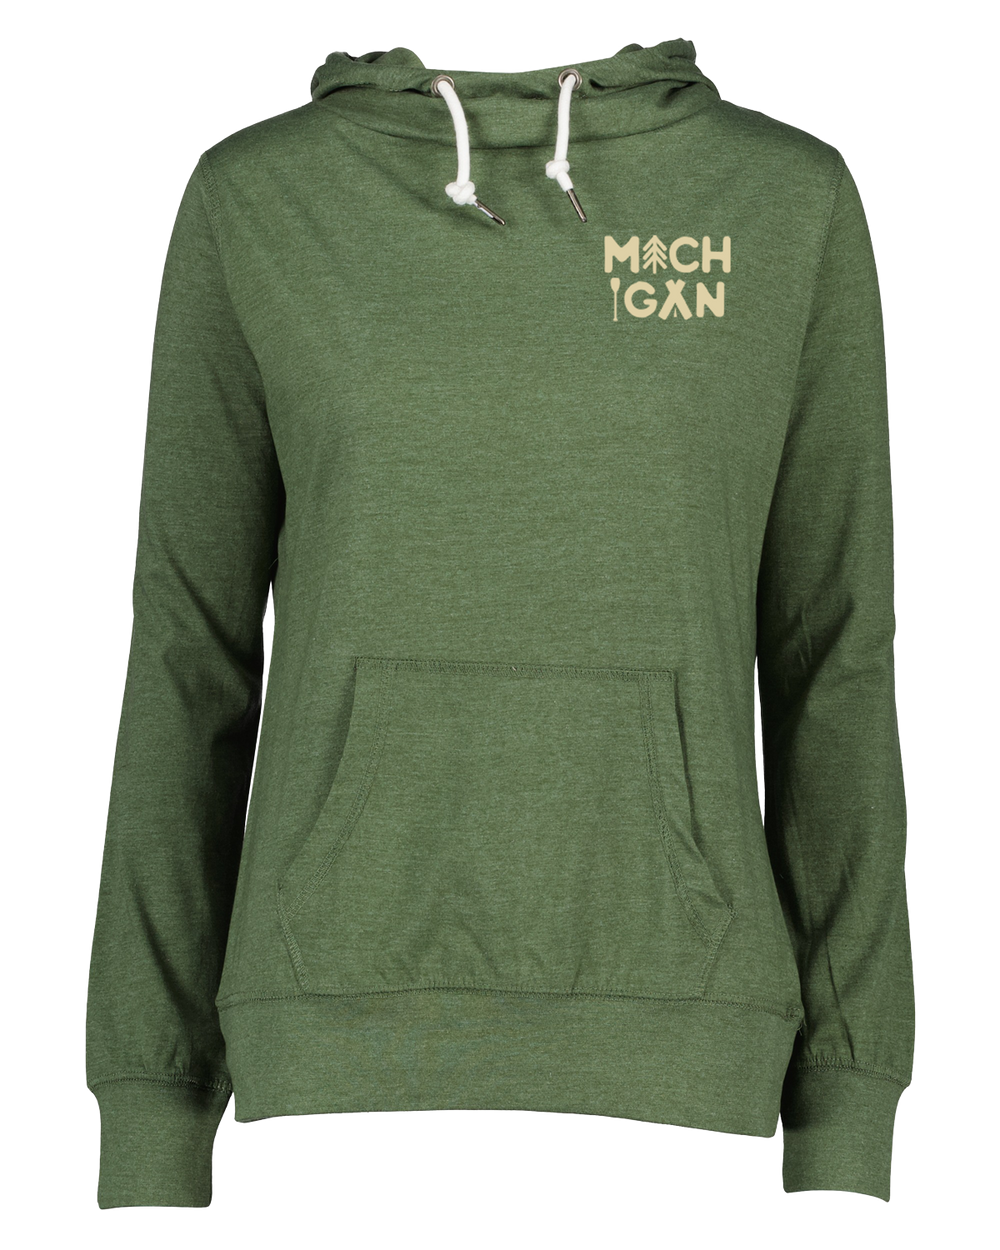 Women's Michigan Outdoors Funnel Neck Hooded Long Sleeve